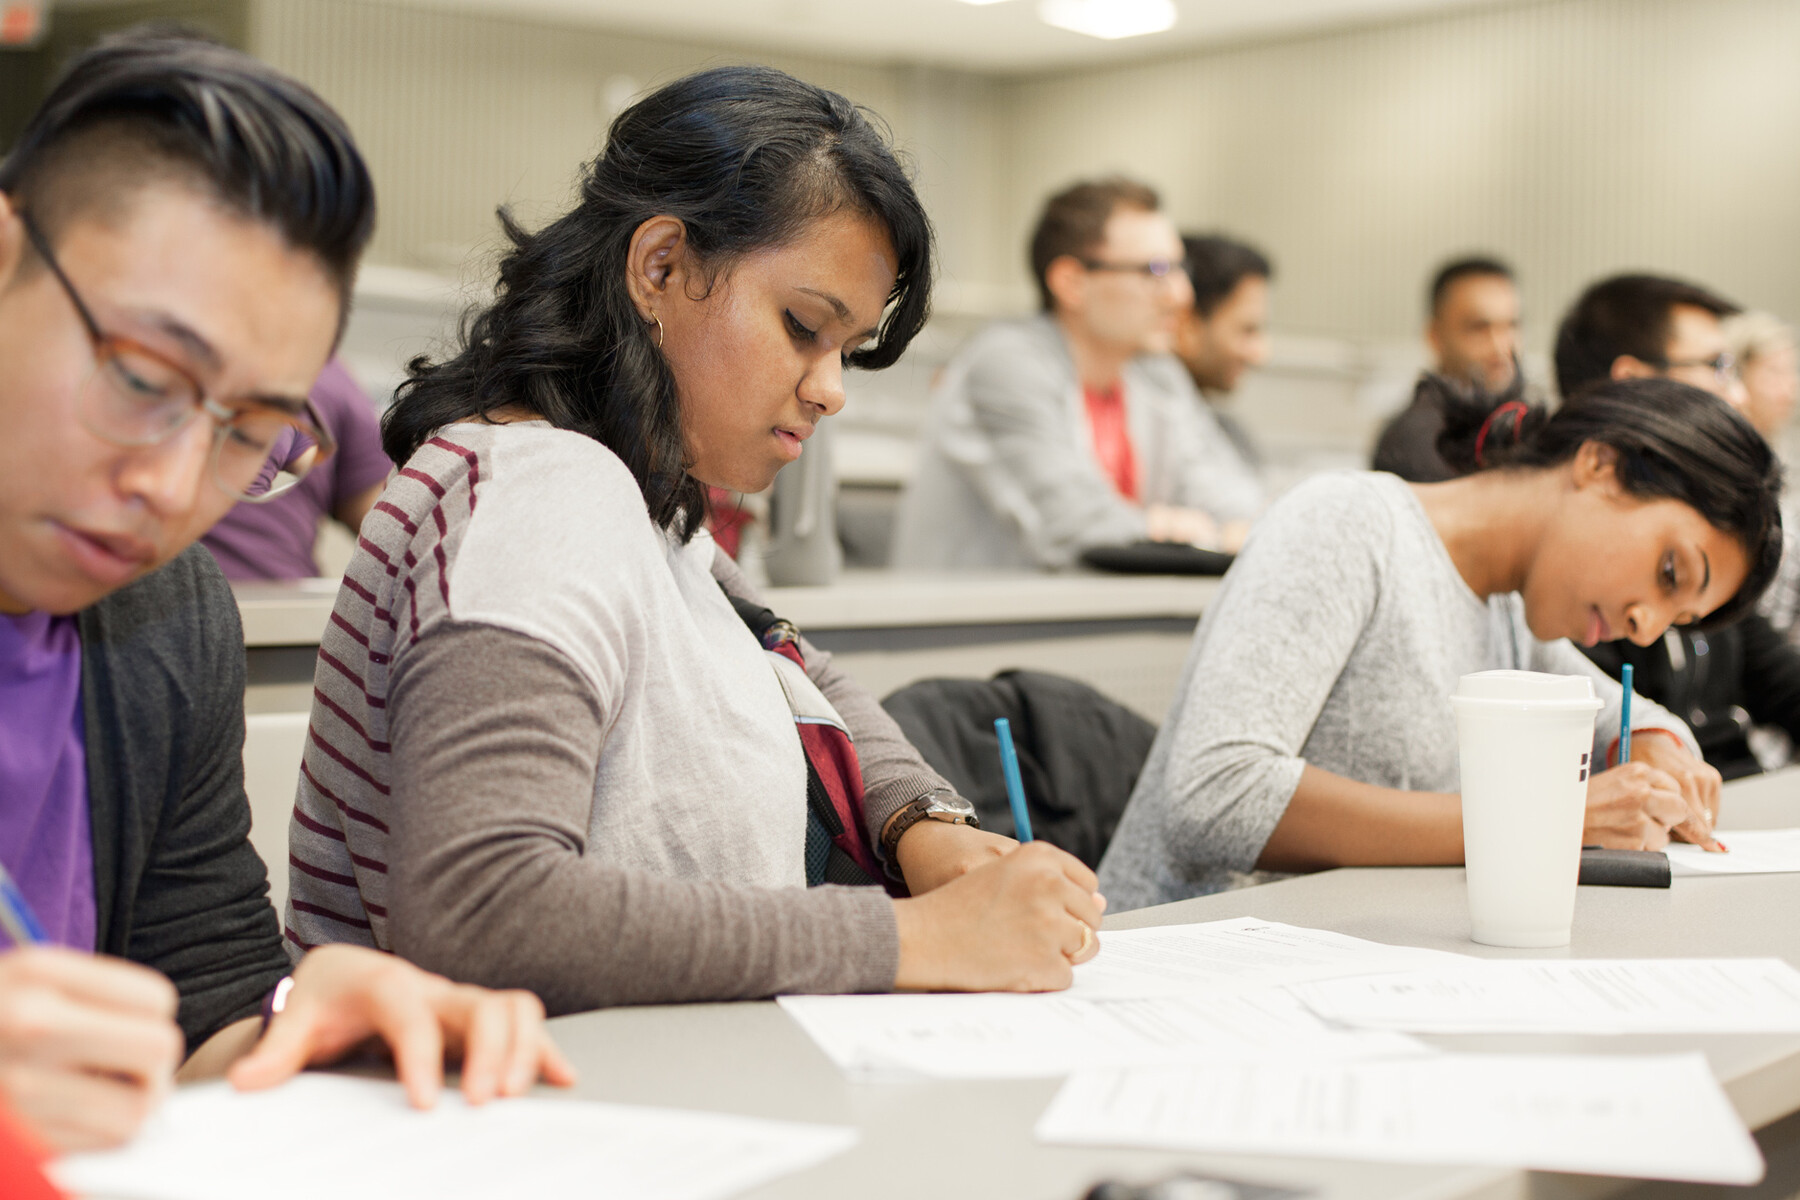 Students writing in a lecture hall